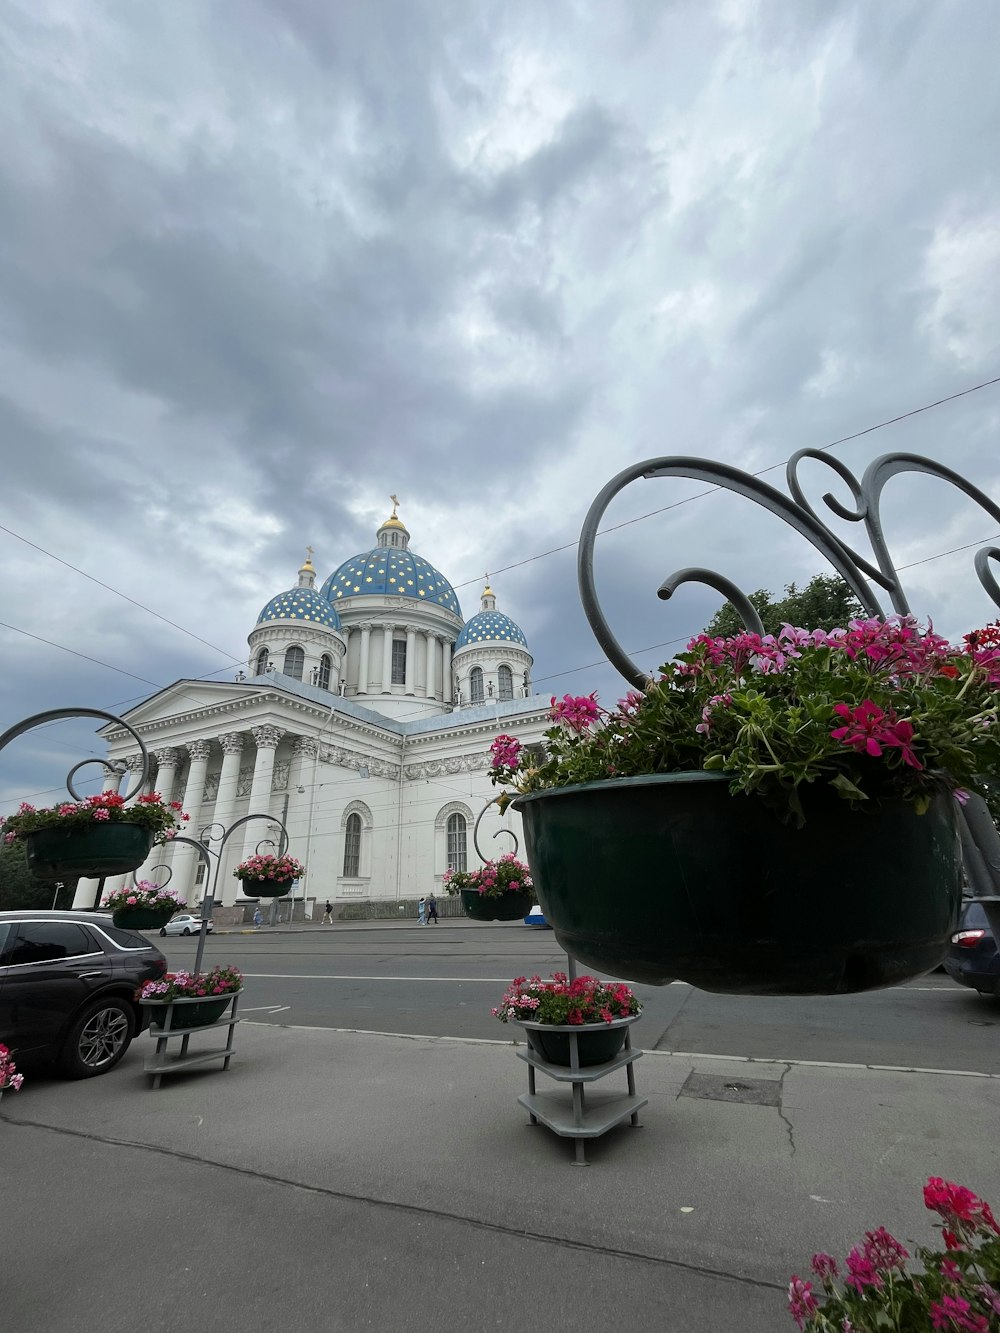 a large building with a dome and flowers in the foreground